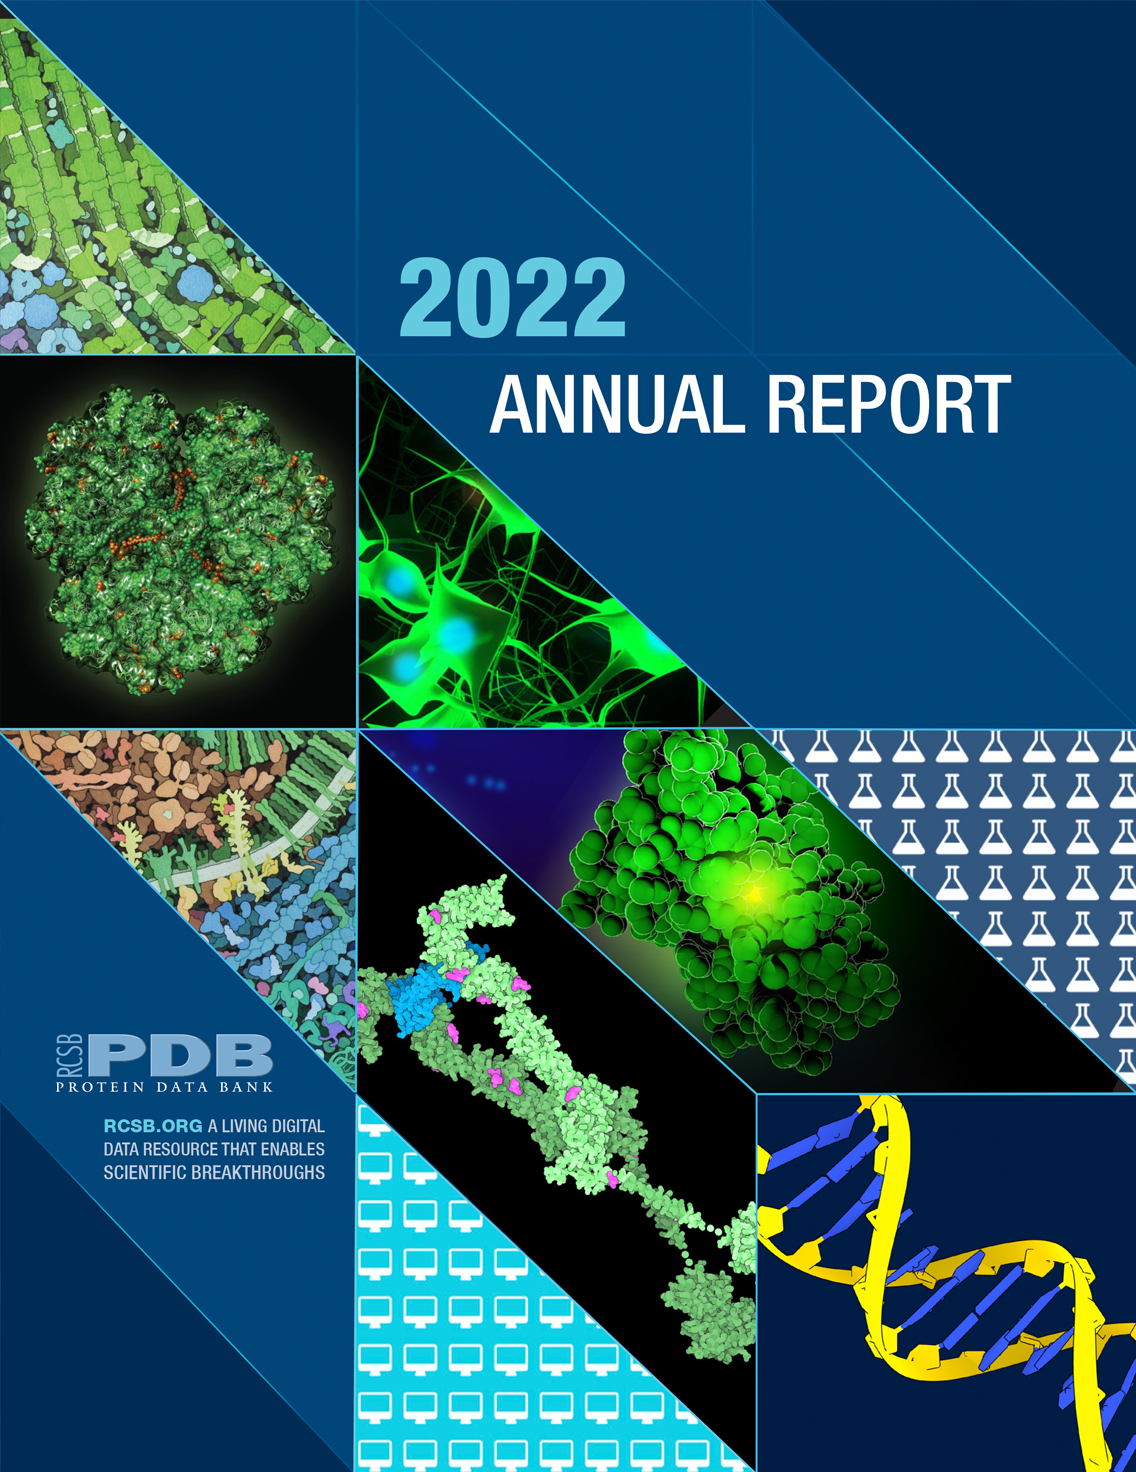 <a href="https://cdn.rcsb.org/rcsb-pdb/general_information/news_publications/annual_reports/annual_report_year_2022.pdf">Download the 2022 Annual Report PDF</a>